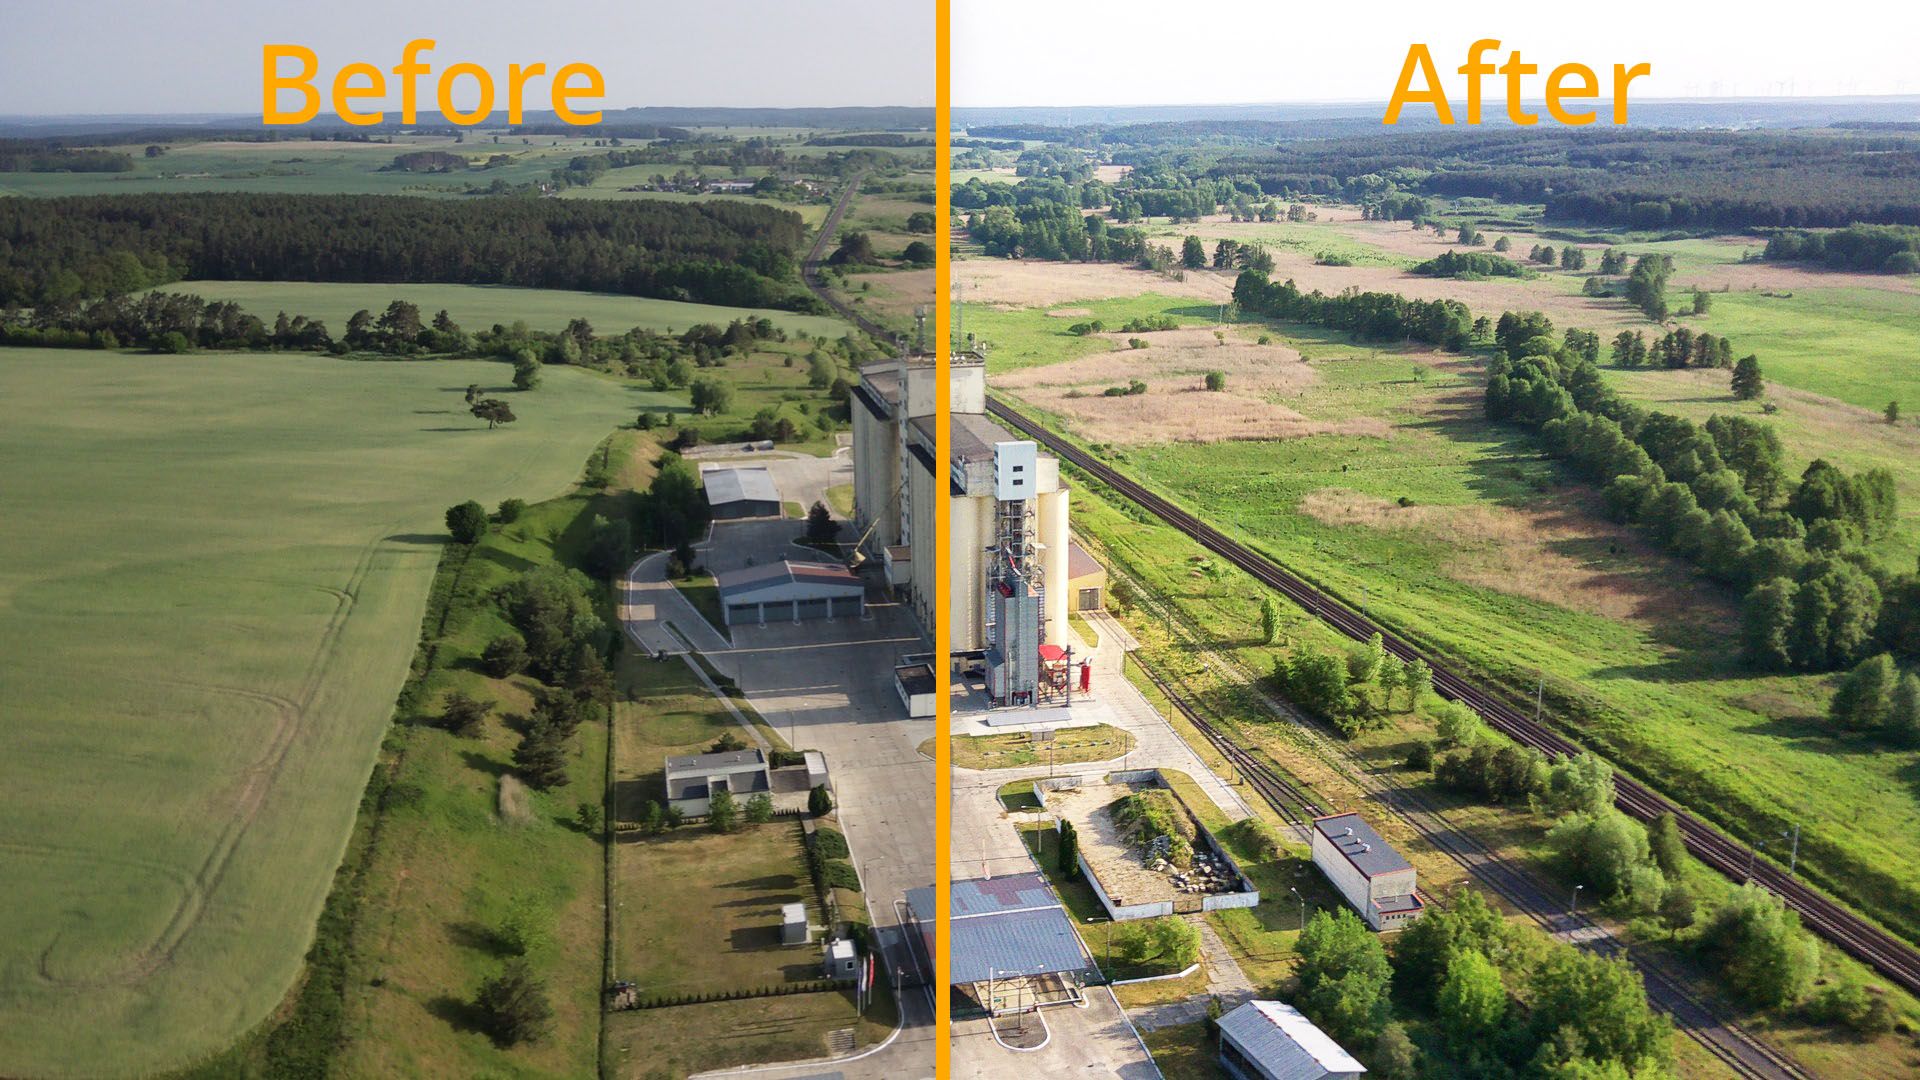 photo-from-drone-comparison-postrpoduction-before-after-en.jpg